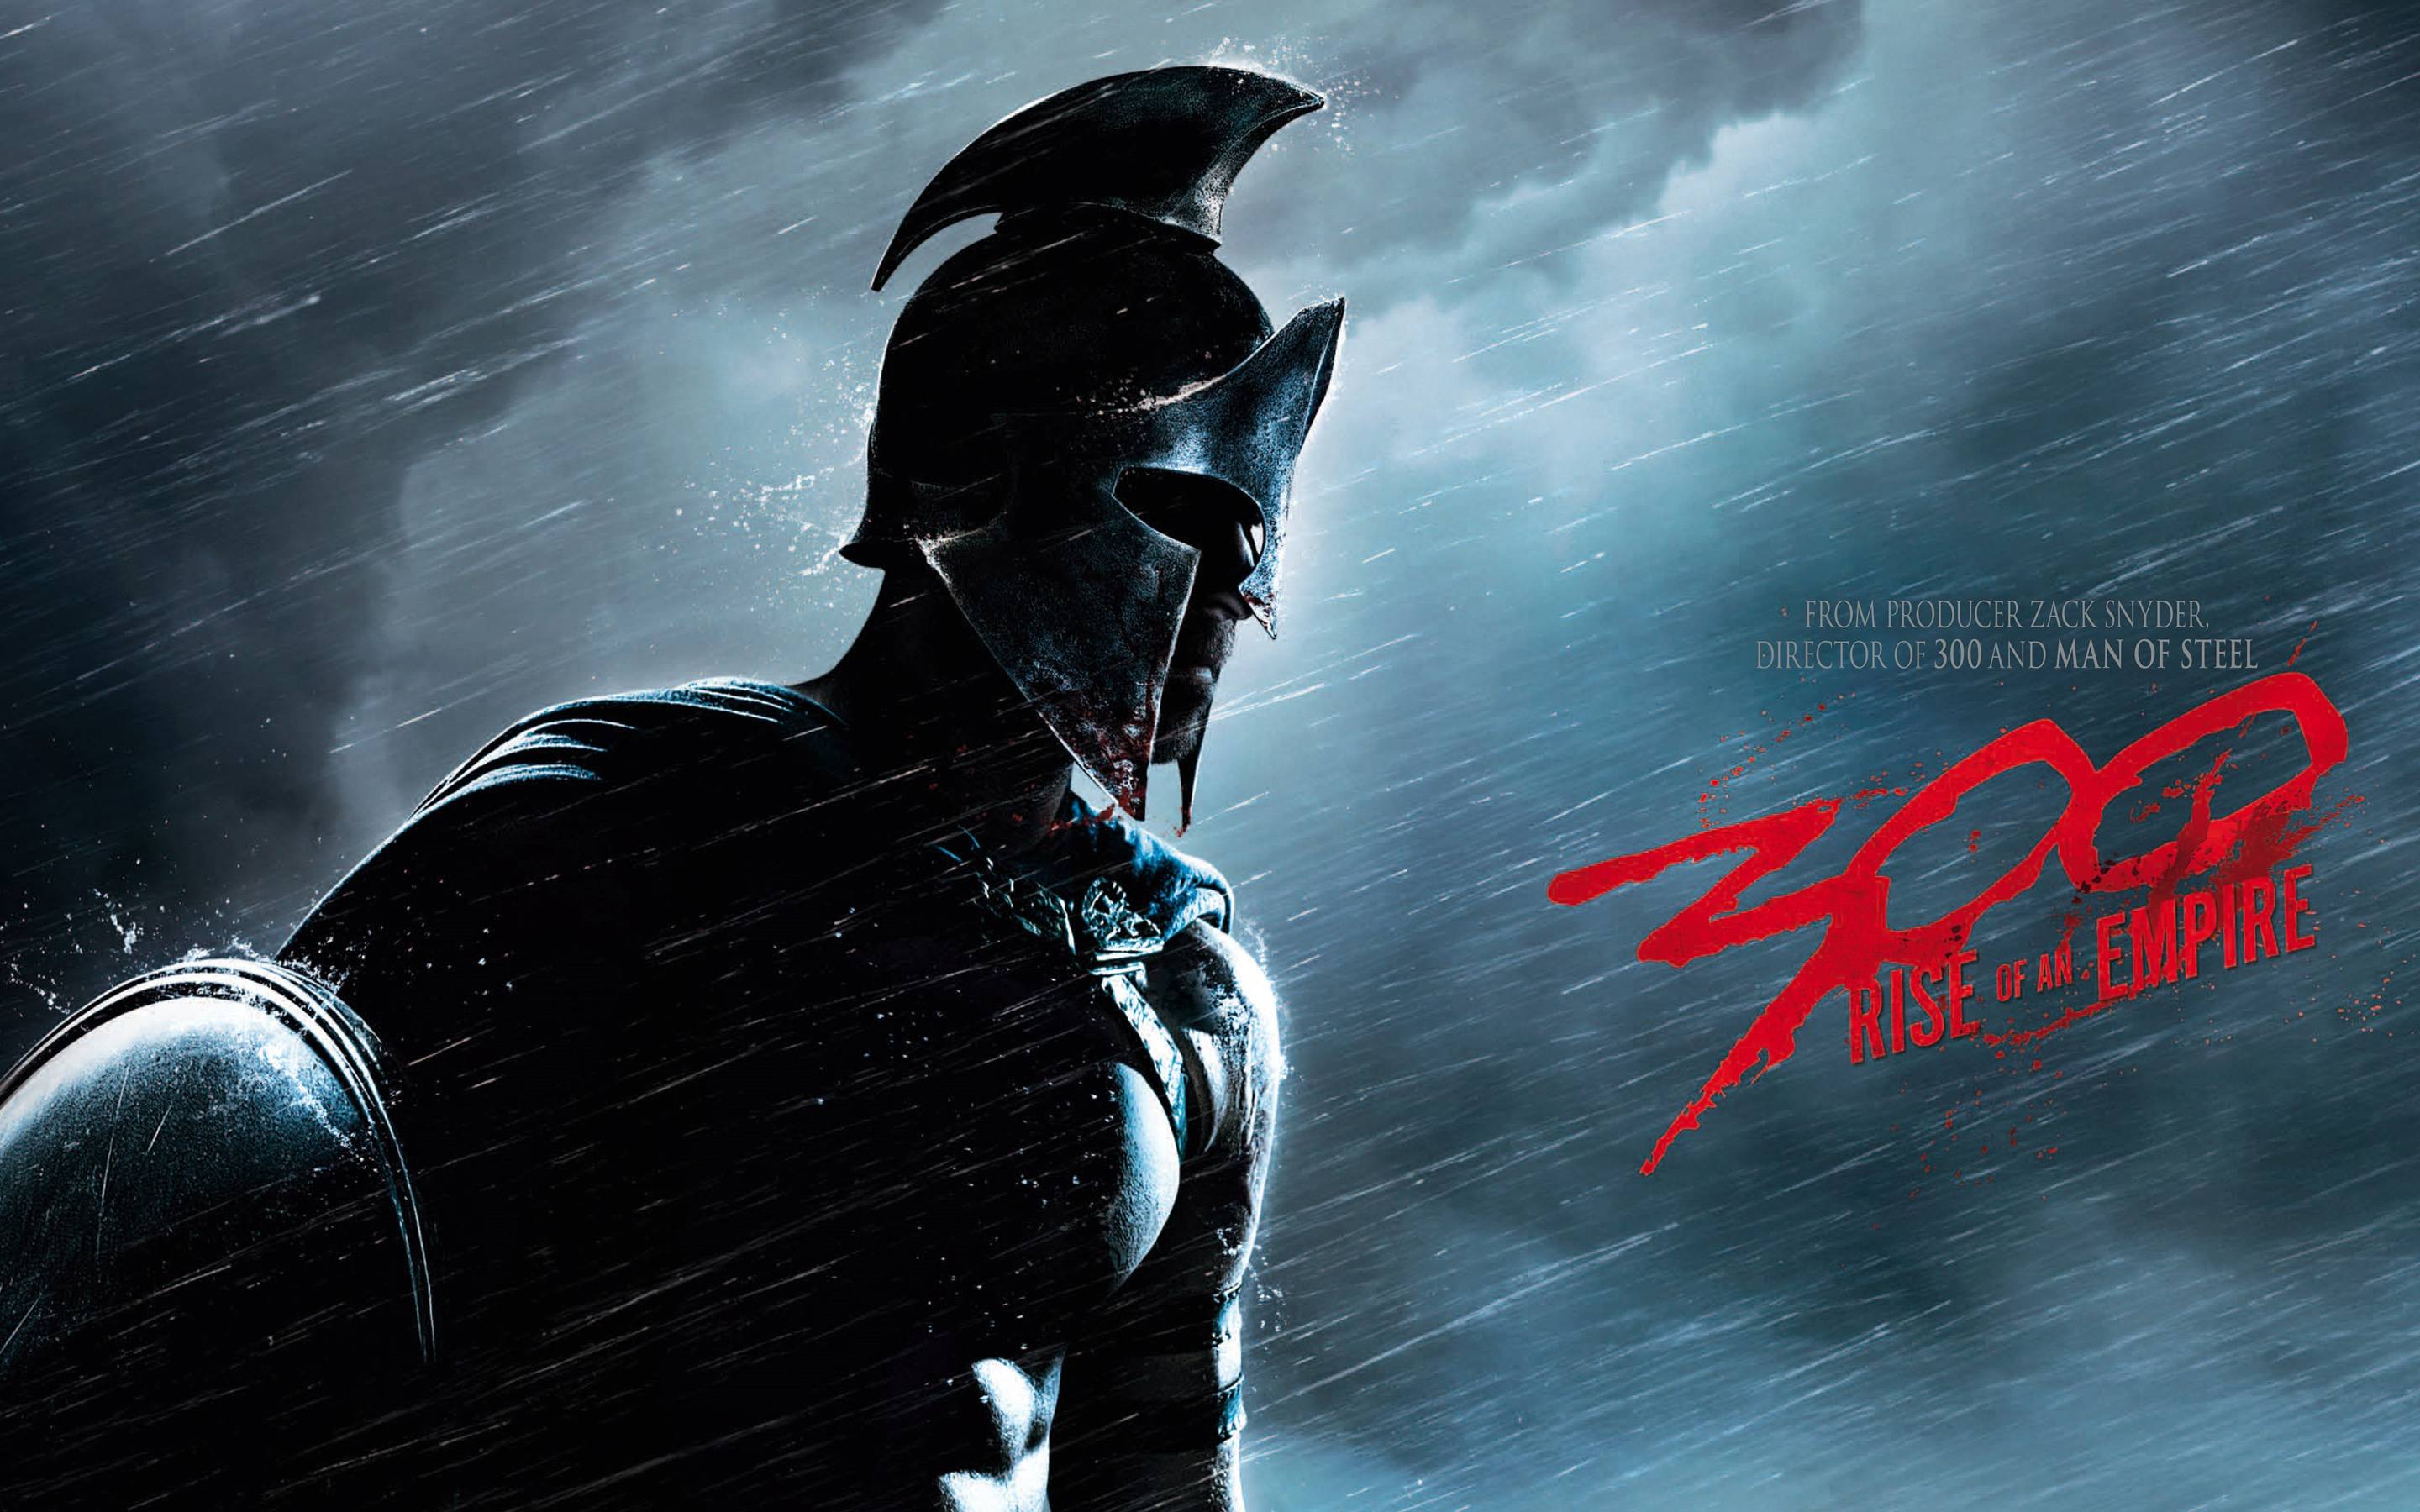 Rise of an Empire Movie Wallpaper